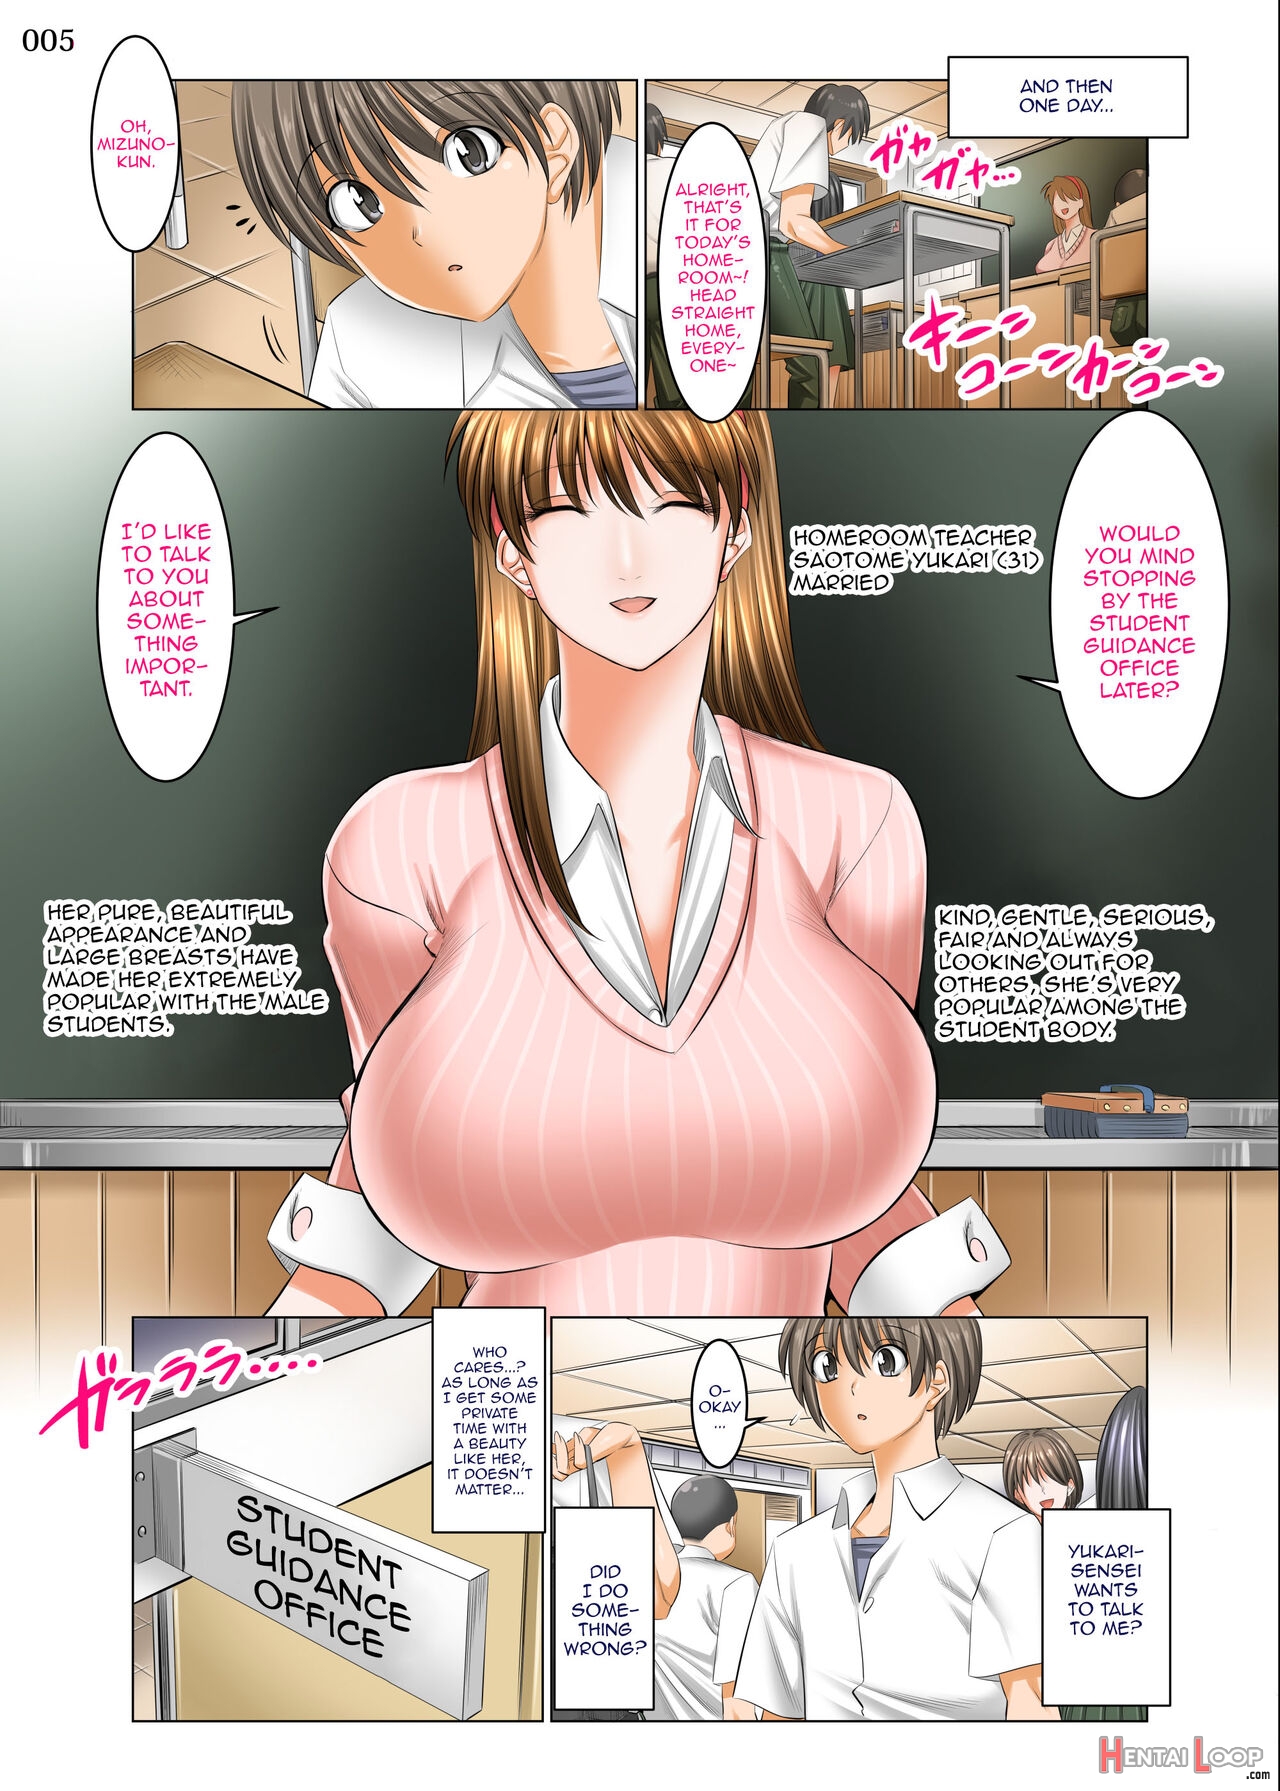 A World Where All Men But Me Are Impotent - Homeroom Teacher Edition page 4